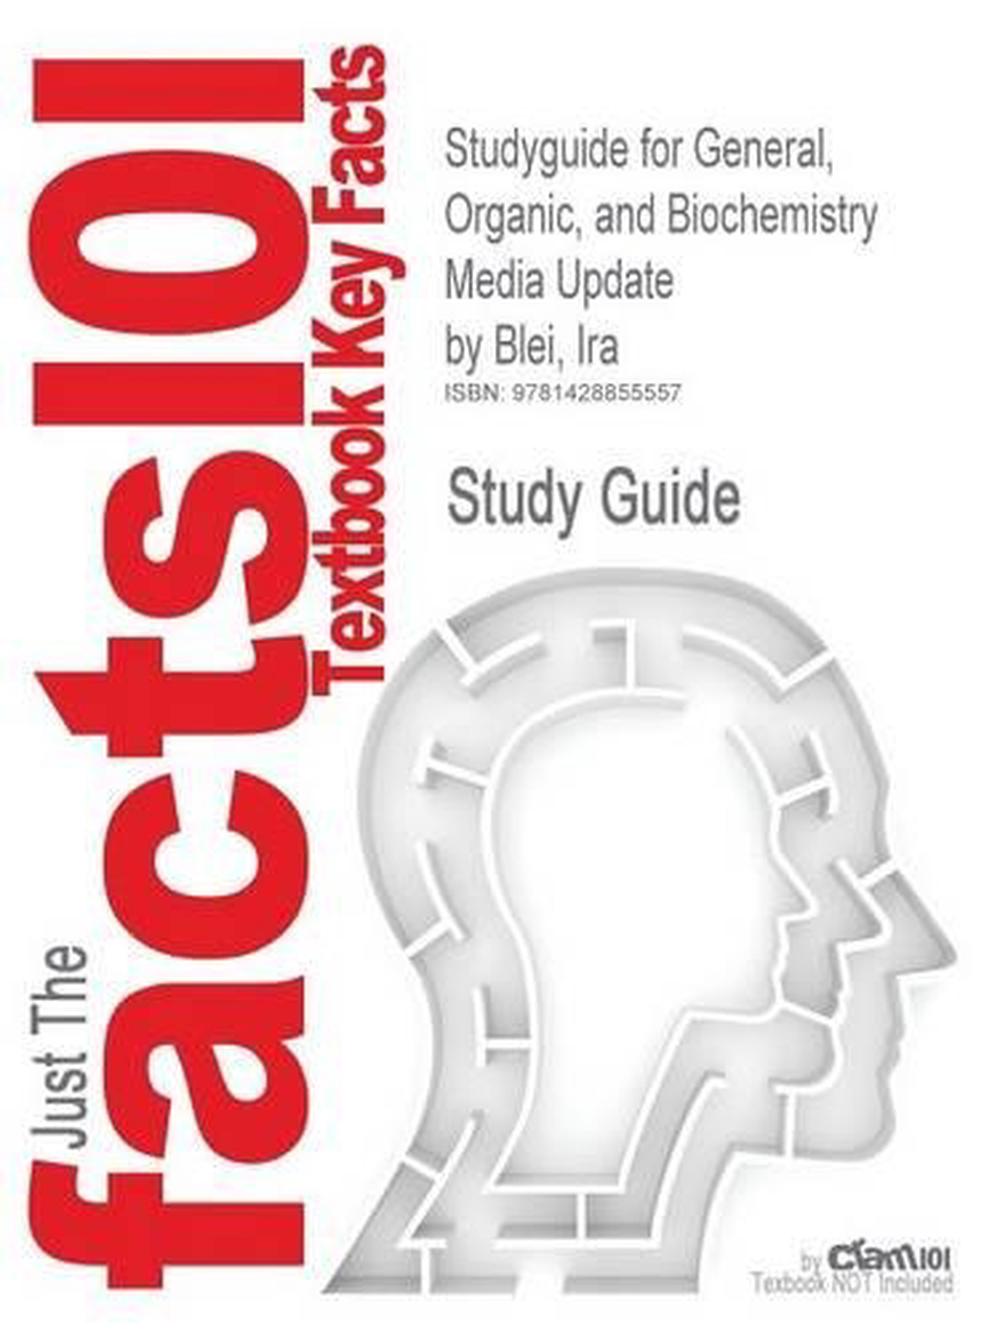 Studyguide for General, Organic, and Biochemistry Media Update by Blei